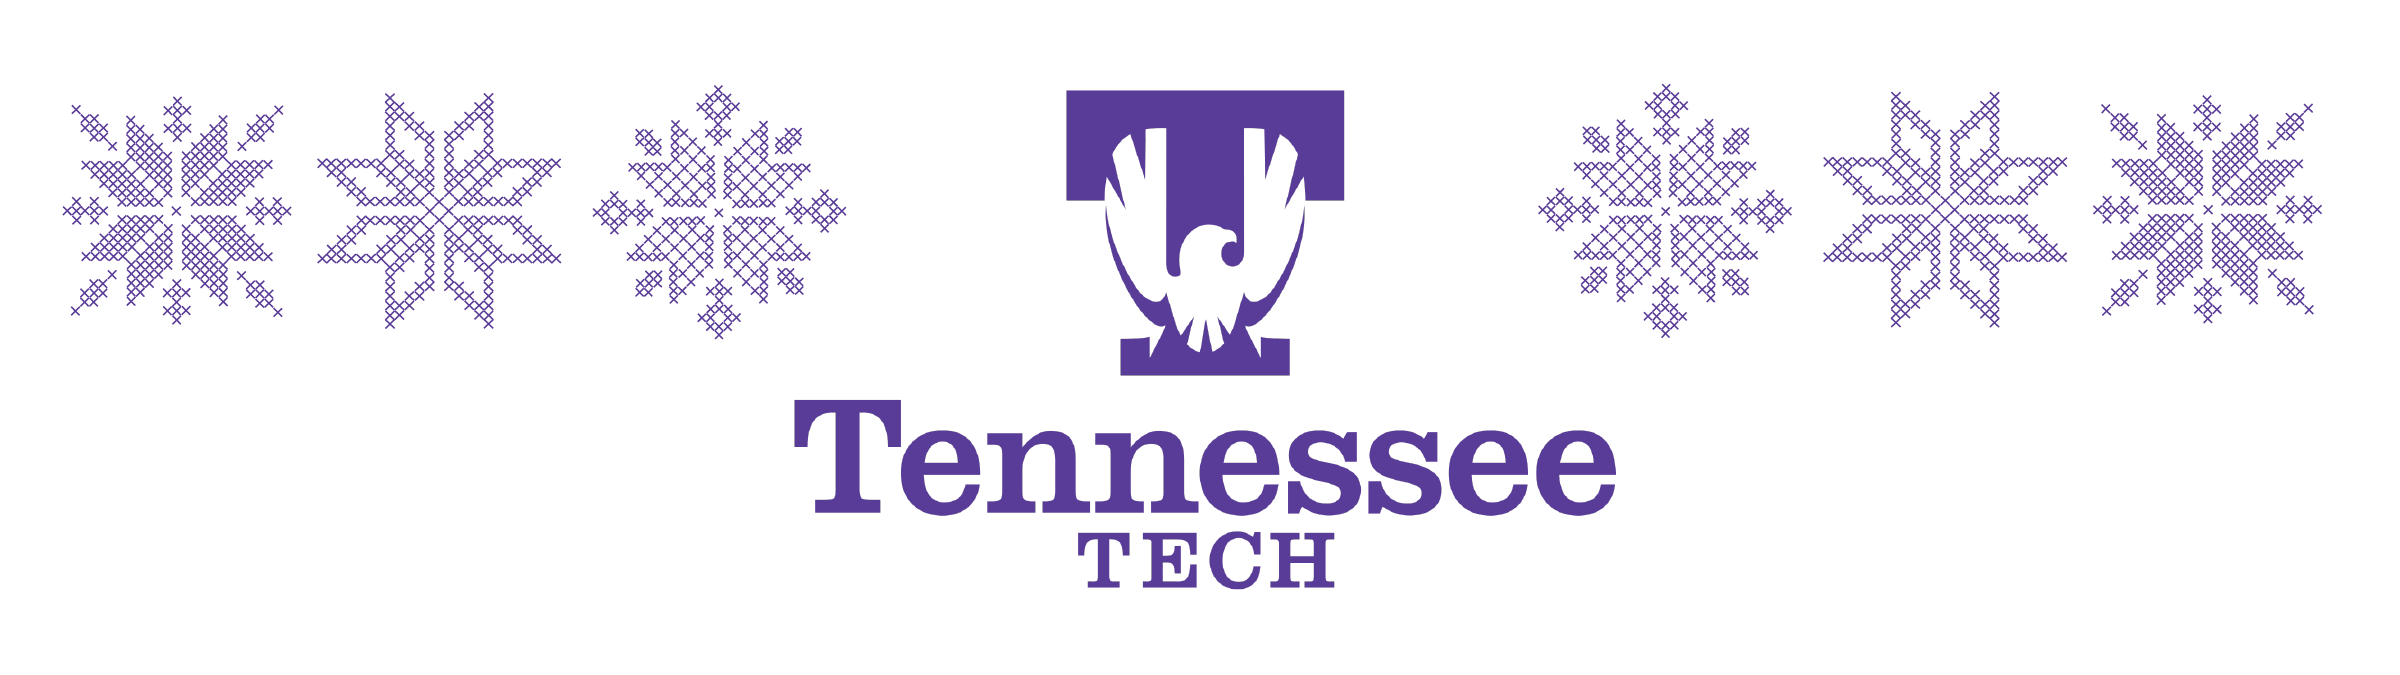 The Tennessee Tech logo with cross-stitch snowflakes